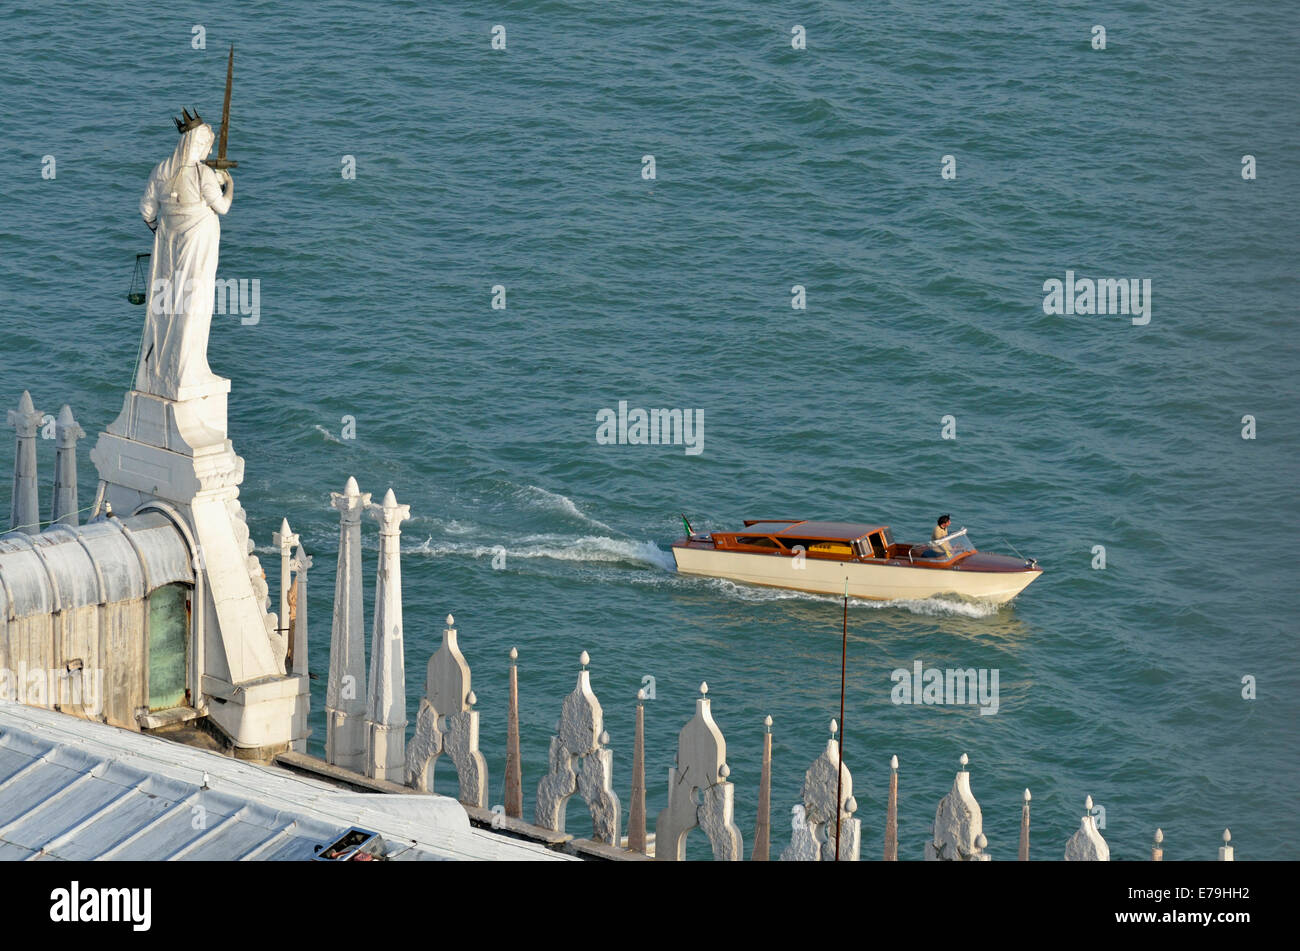 Statue on the Doges Palace facing the Venetian lagoon, as a small motorboat passes Stock Photo